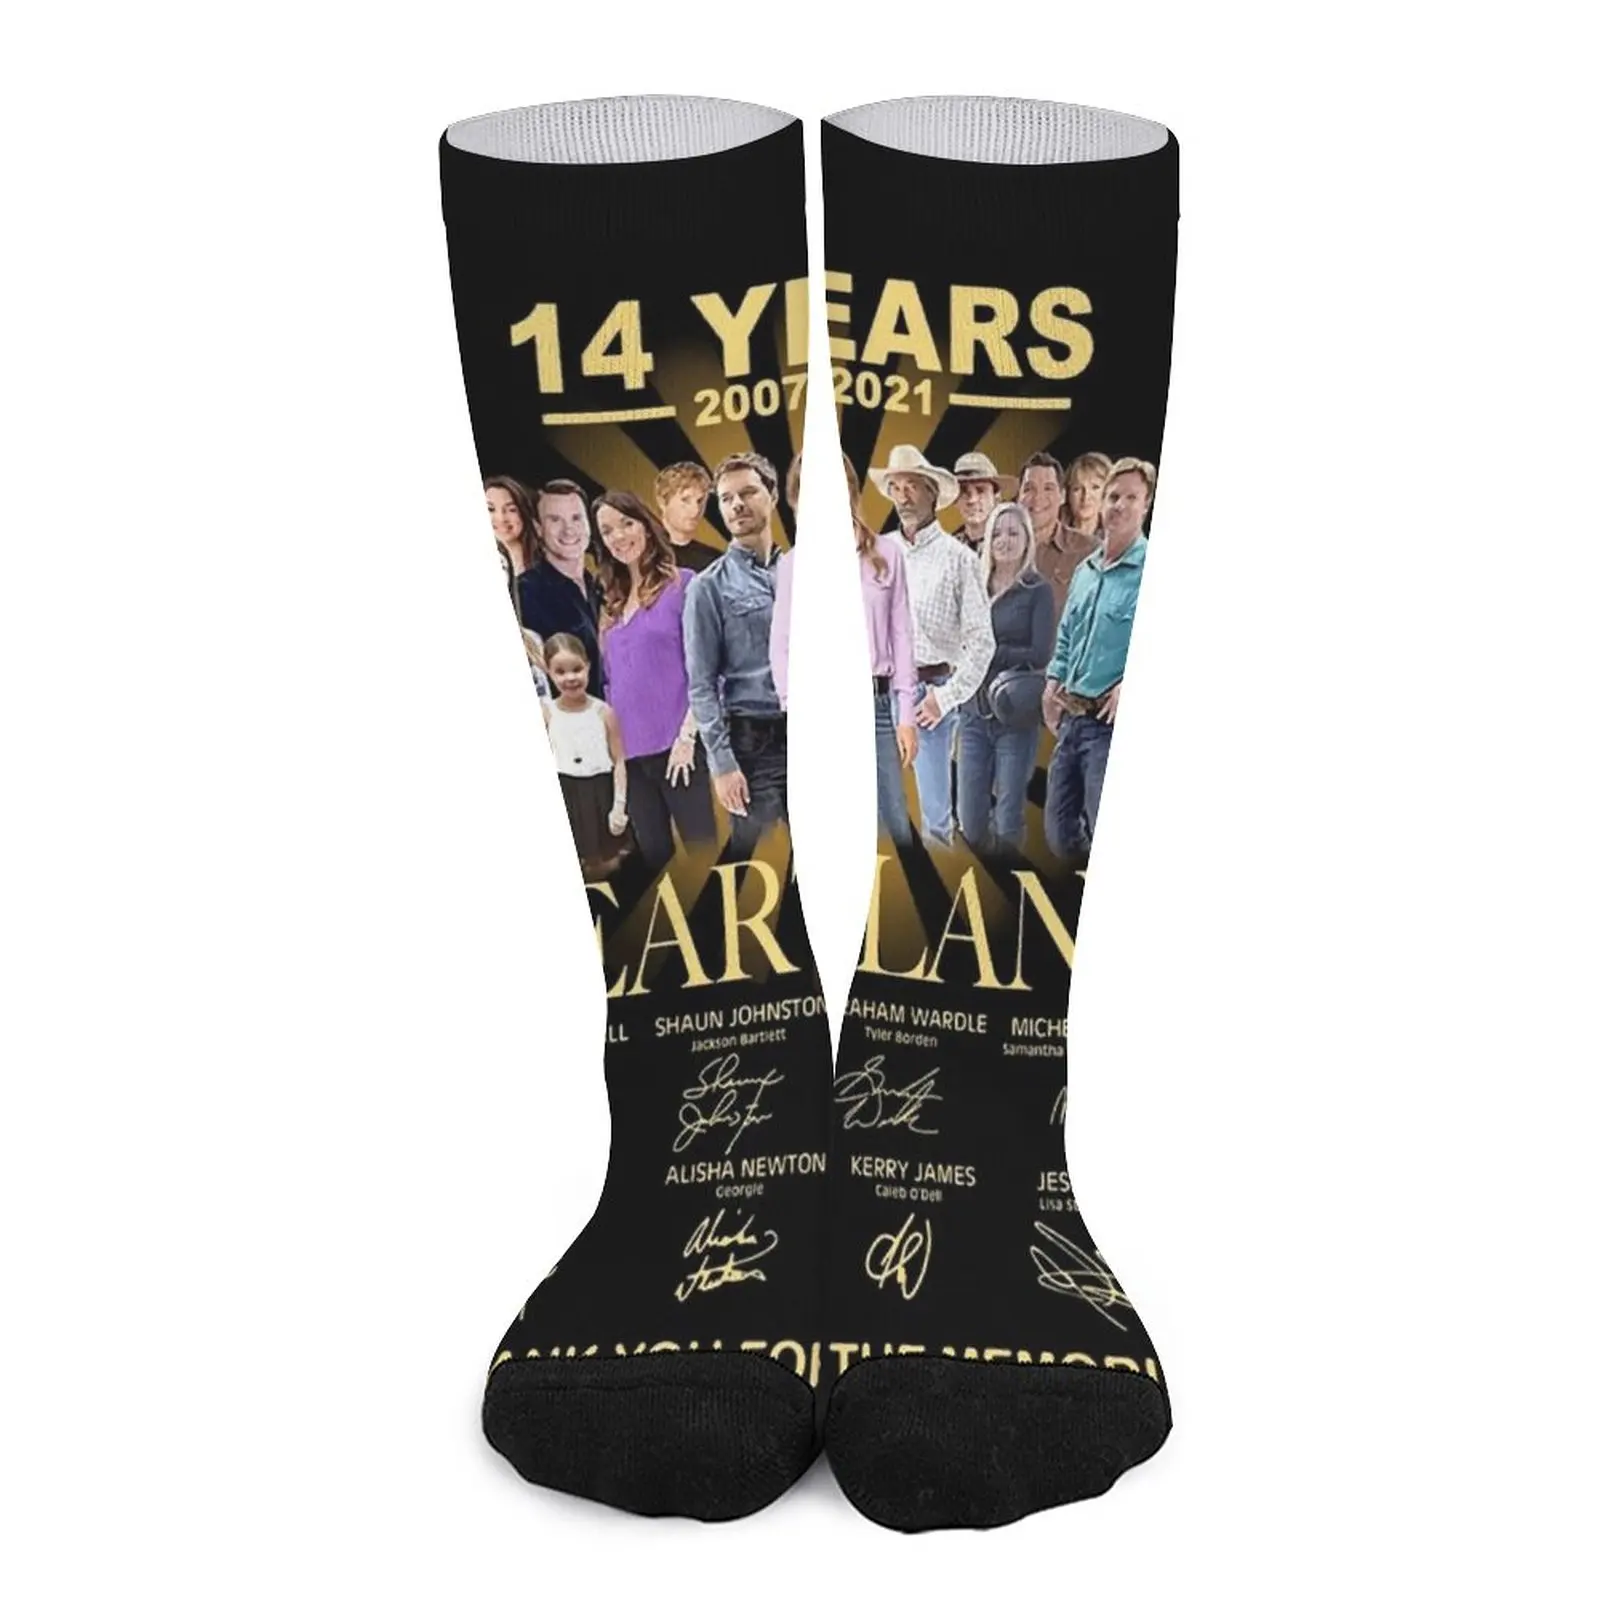 14 Years 2007-2021 Heartland Socks compression socks Women socks funny 2021 men s gym winter casual jogging sets training suit sports tracksuit running workout compression sportswear fitness clothing